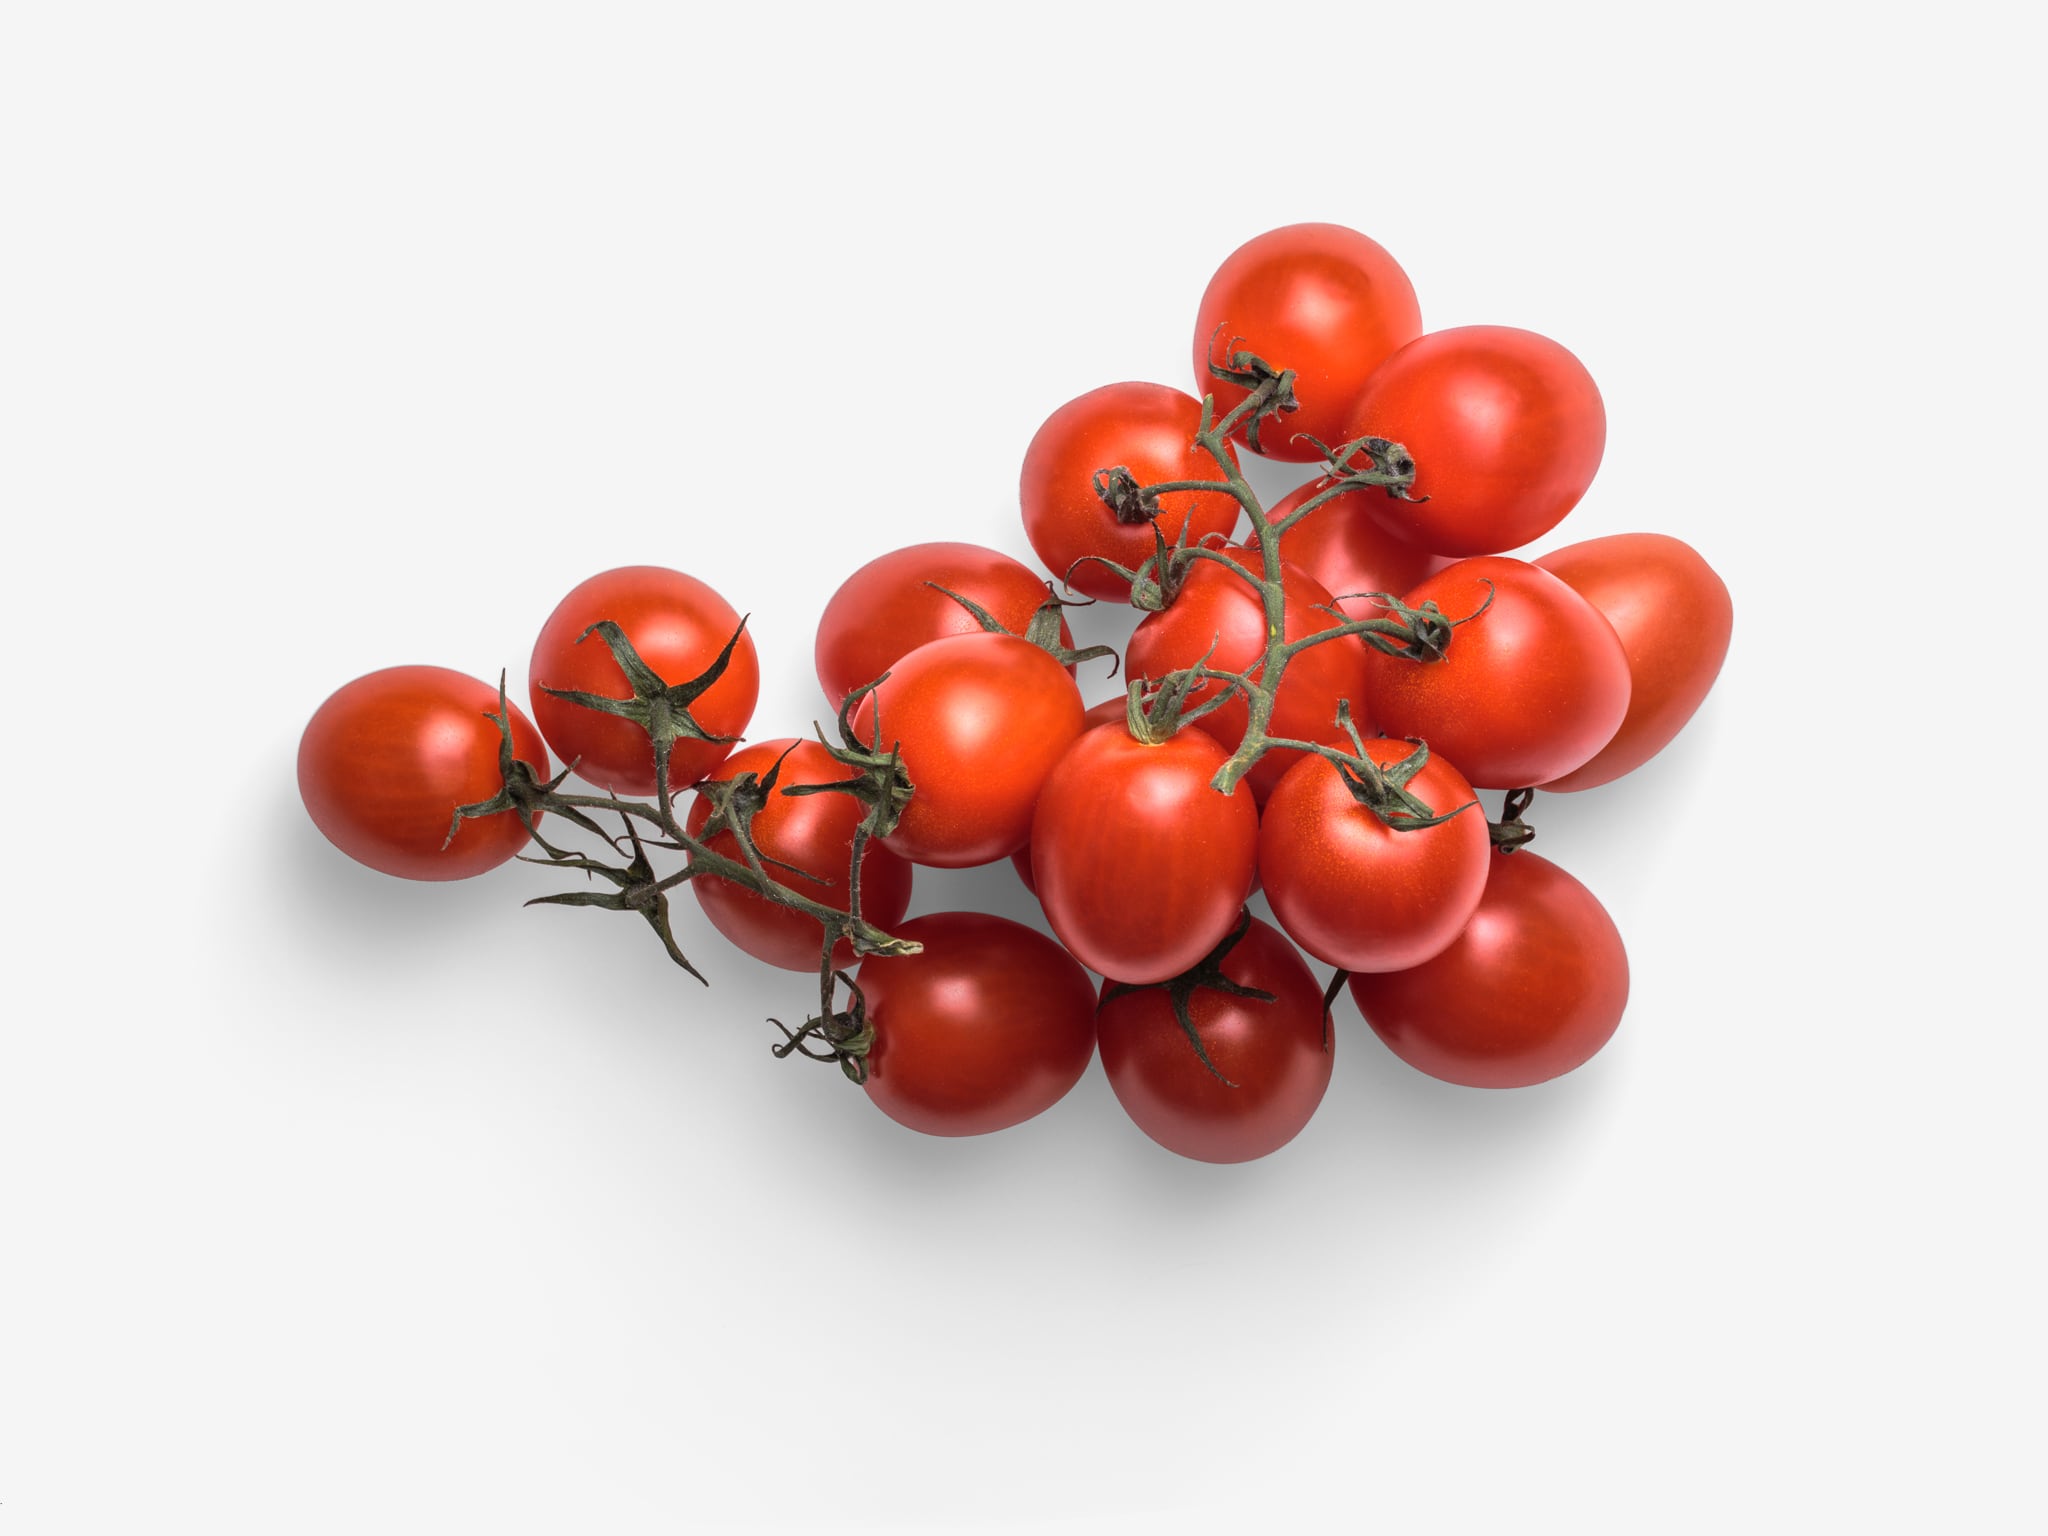 Cherry PSD image with transparent background